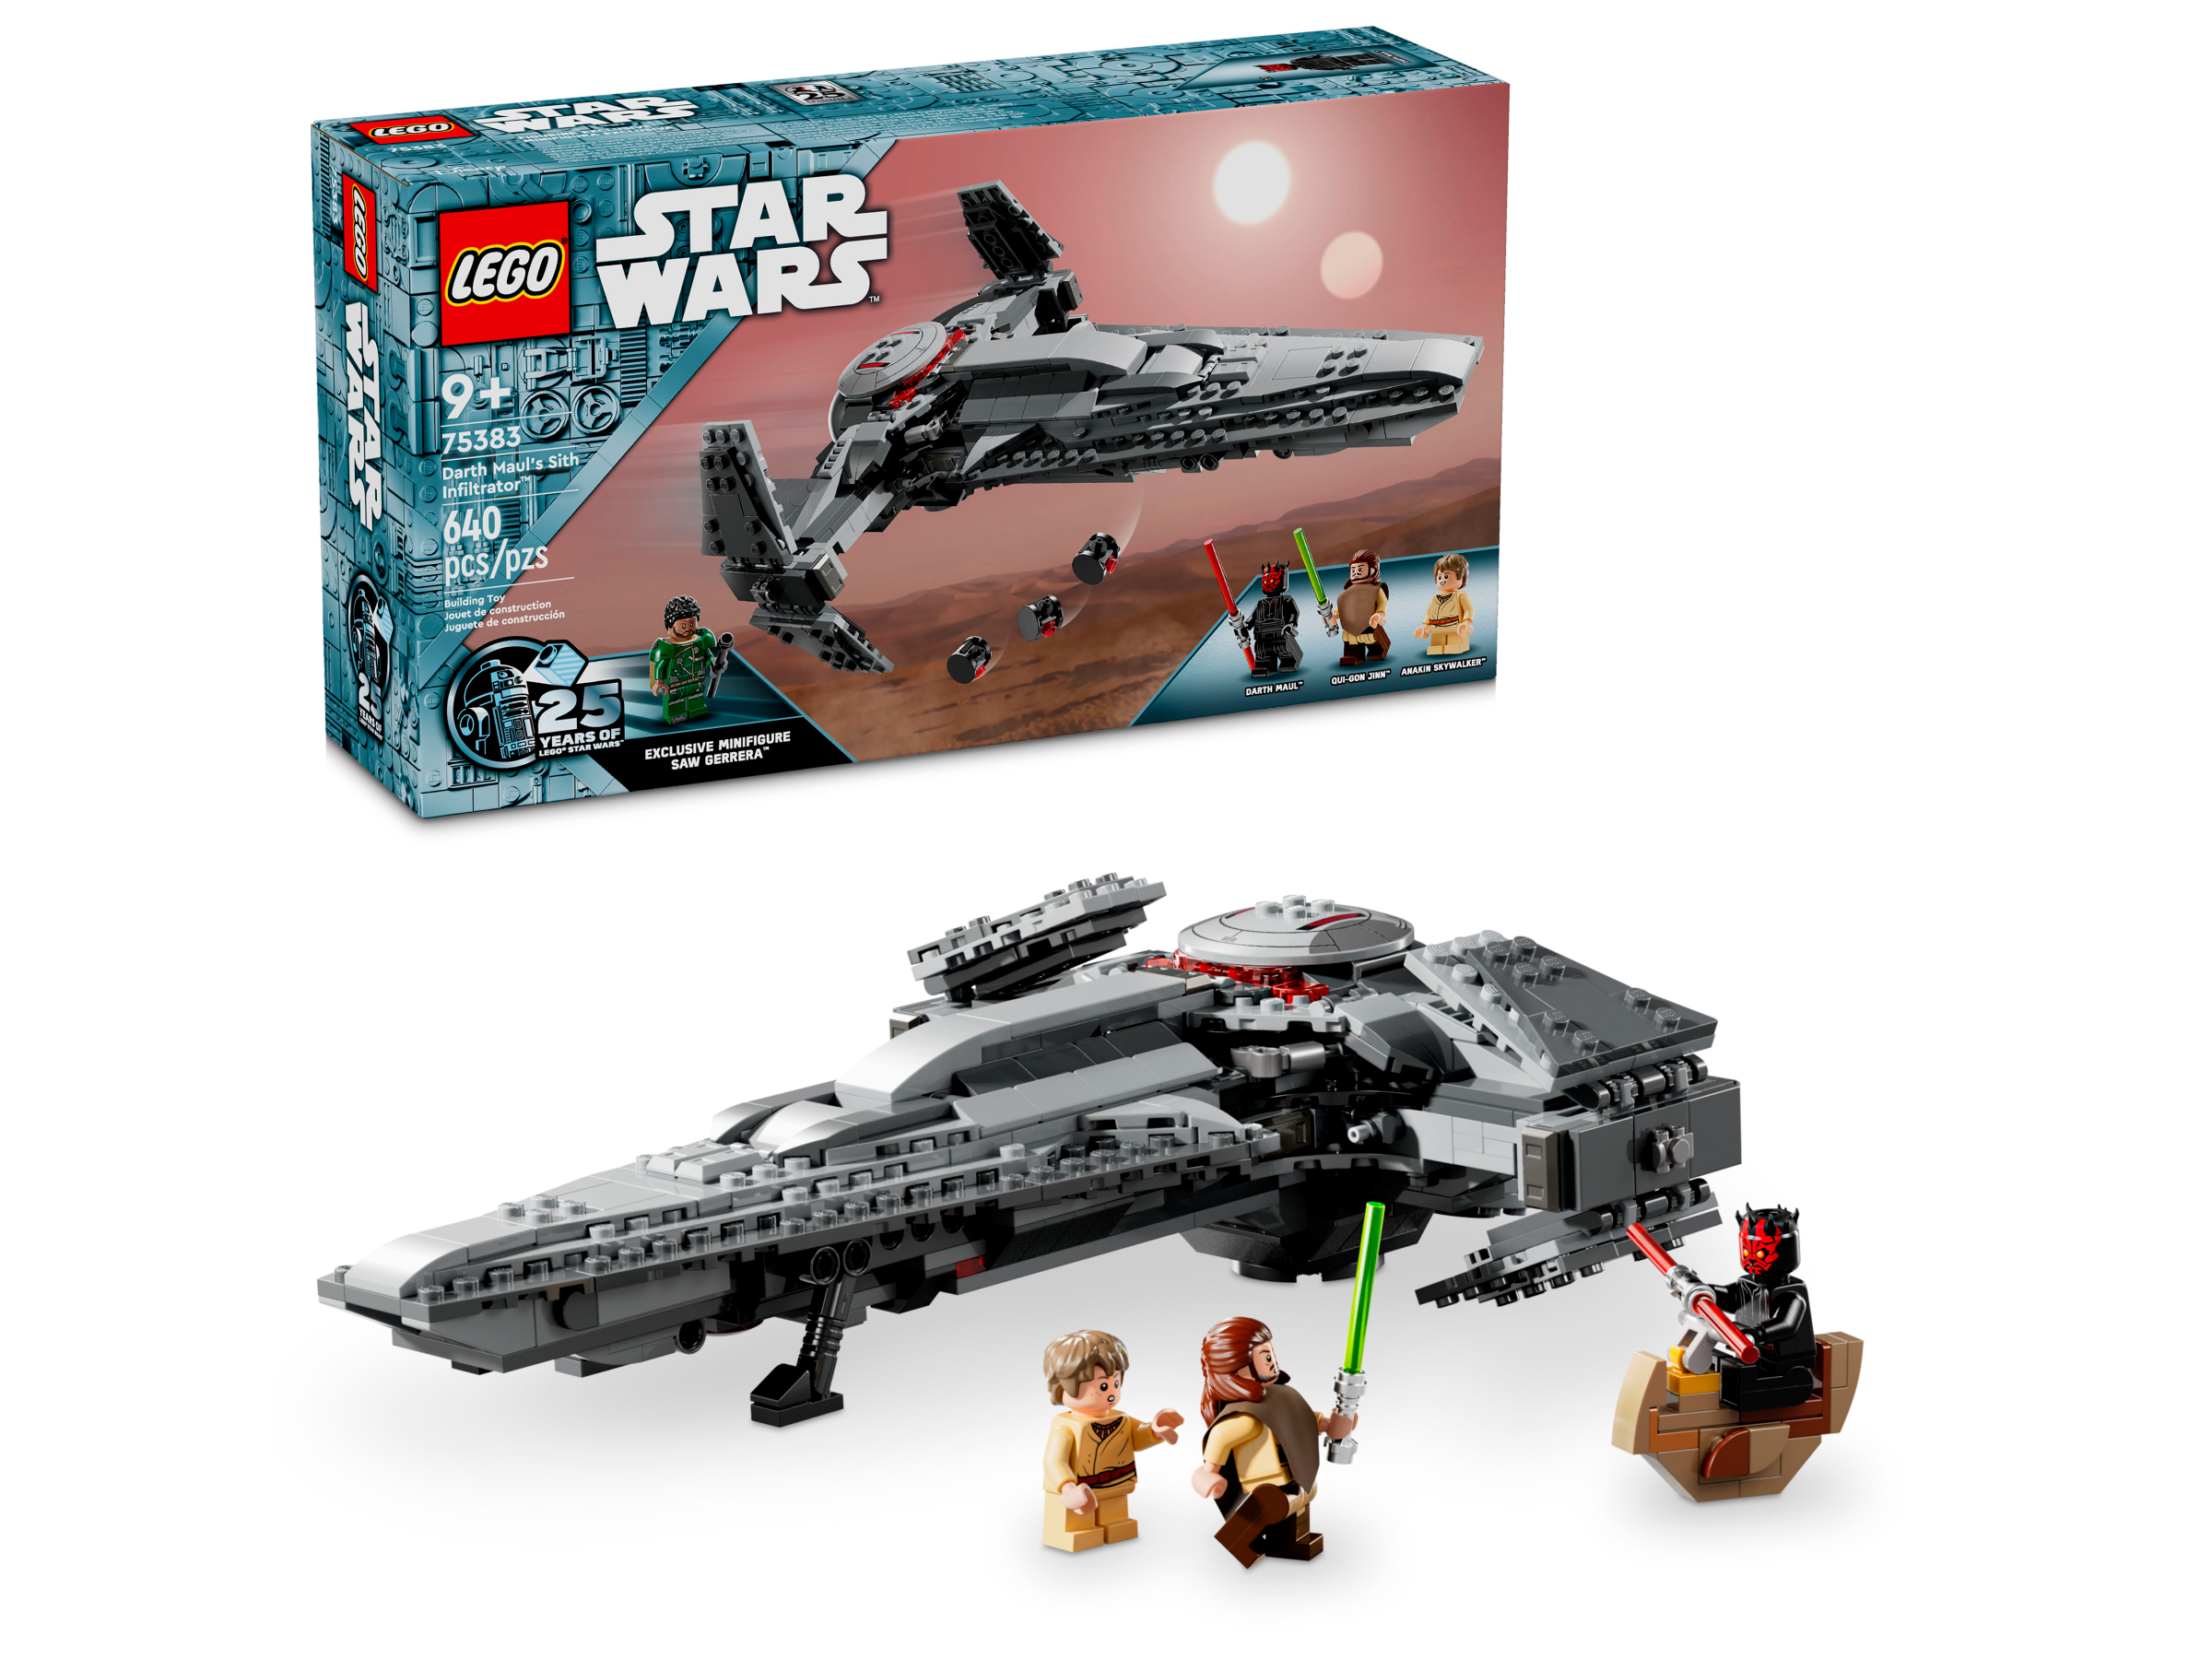 The 25 Best Lego Sets Real Parents and Kids Love